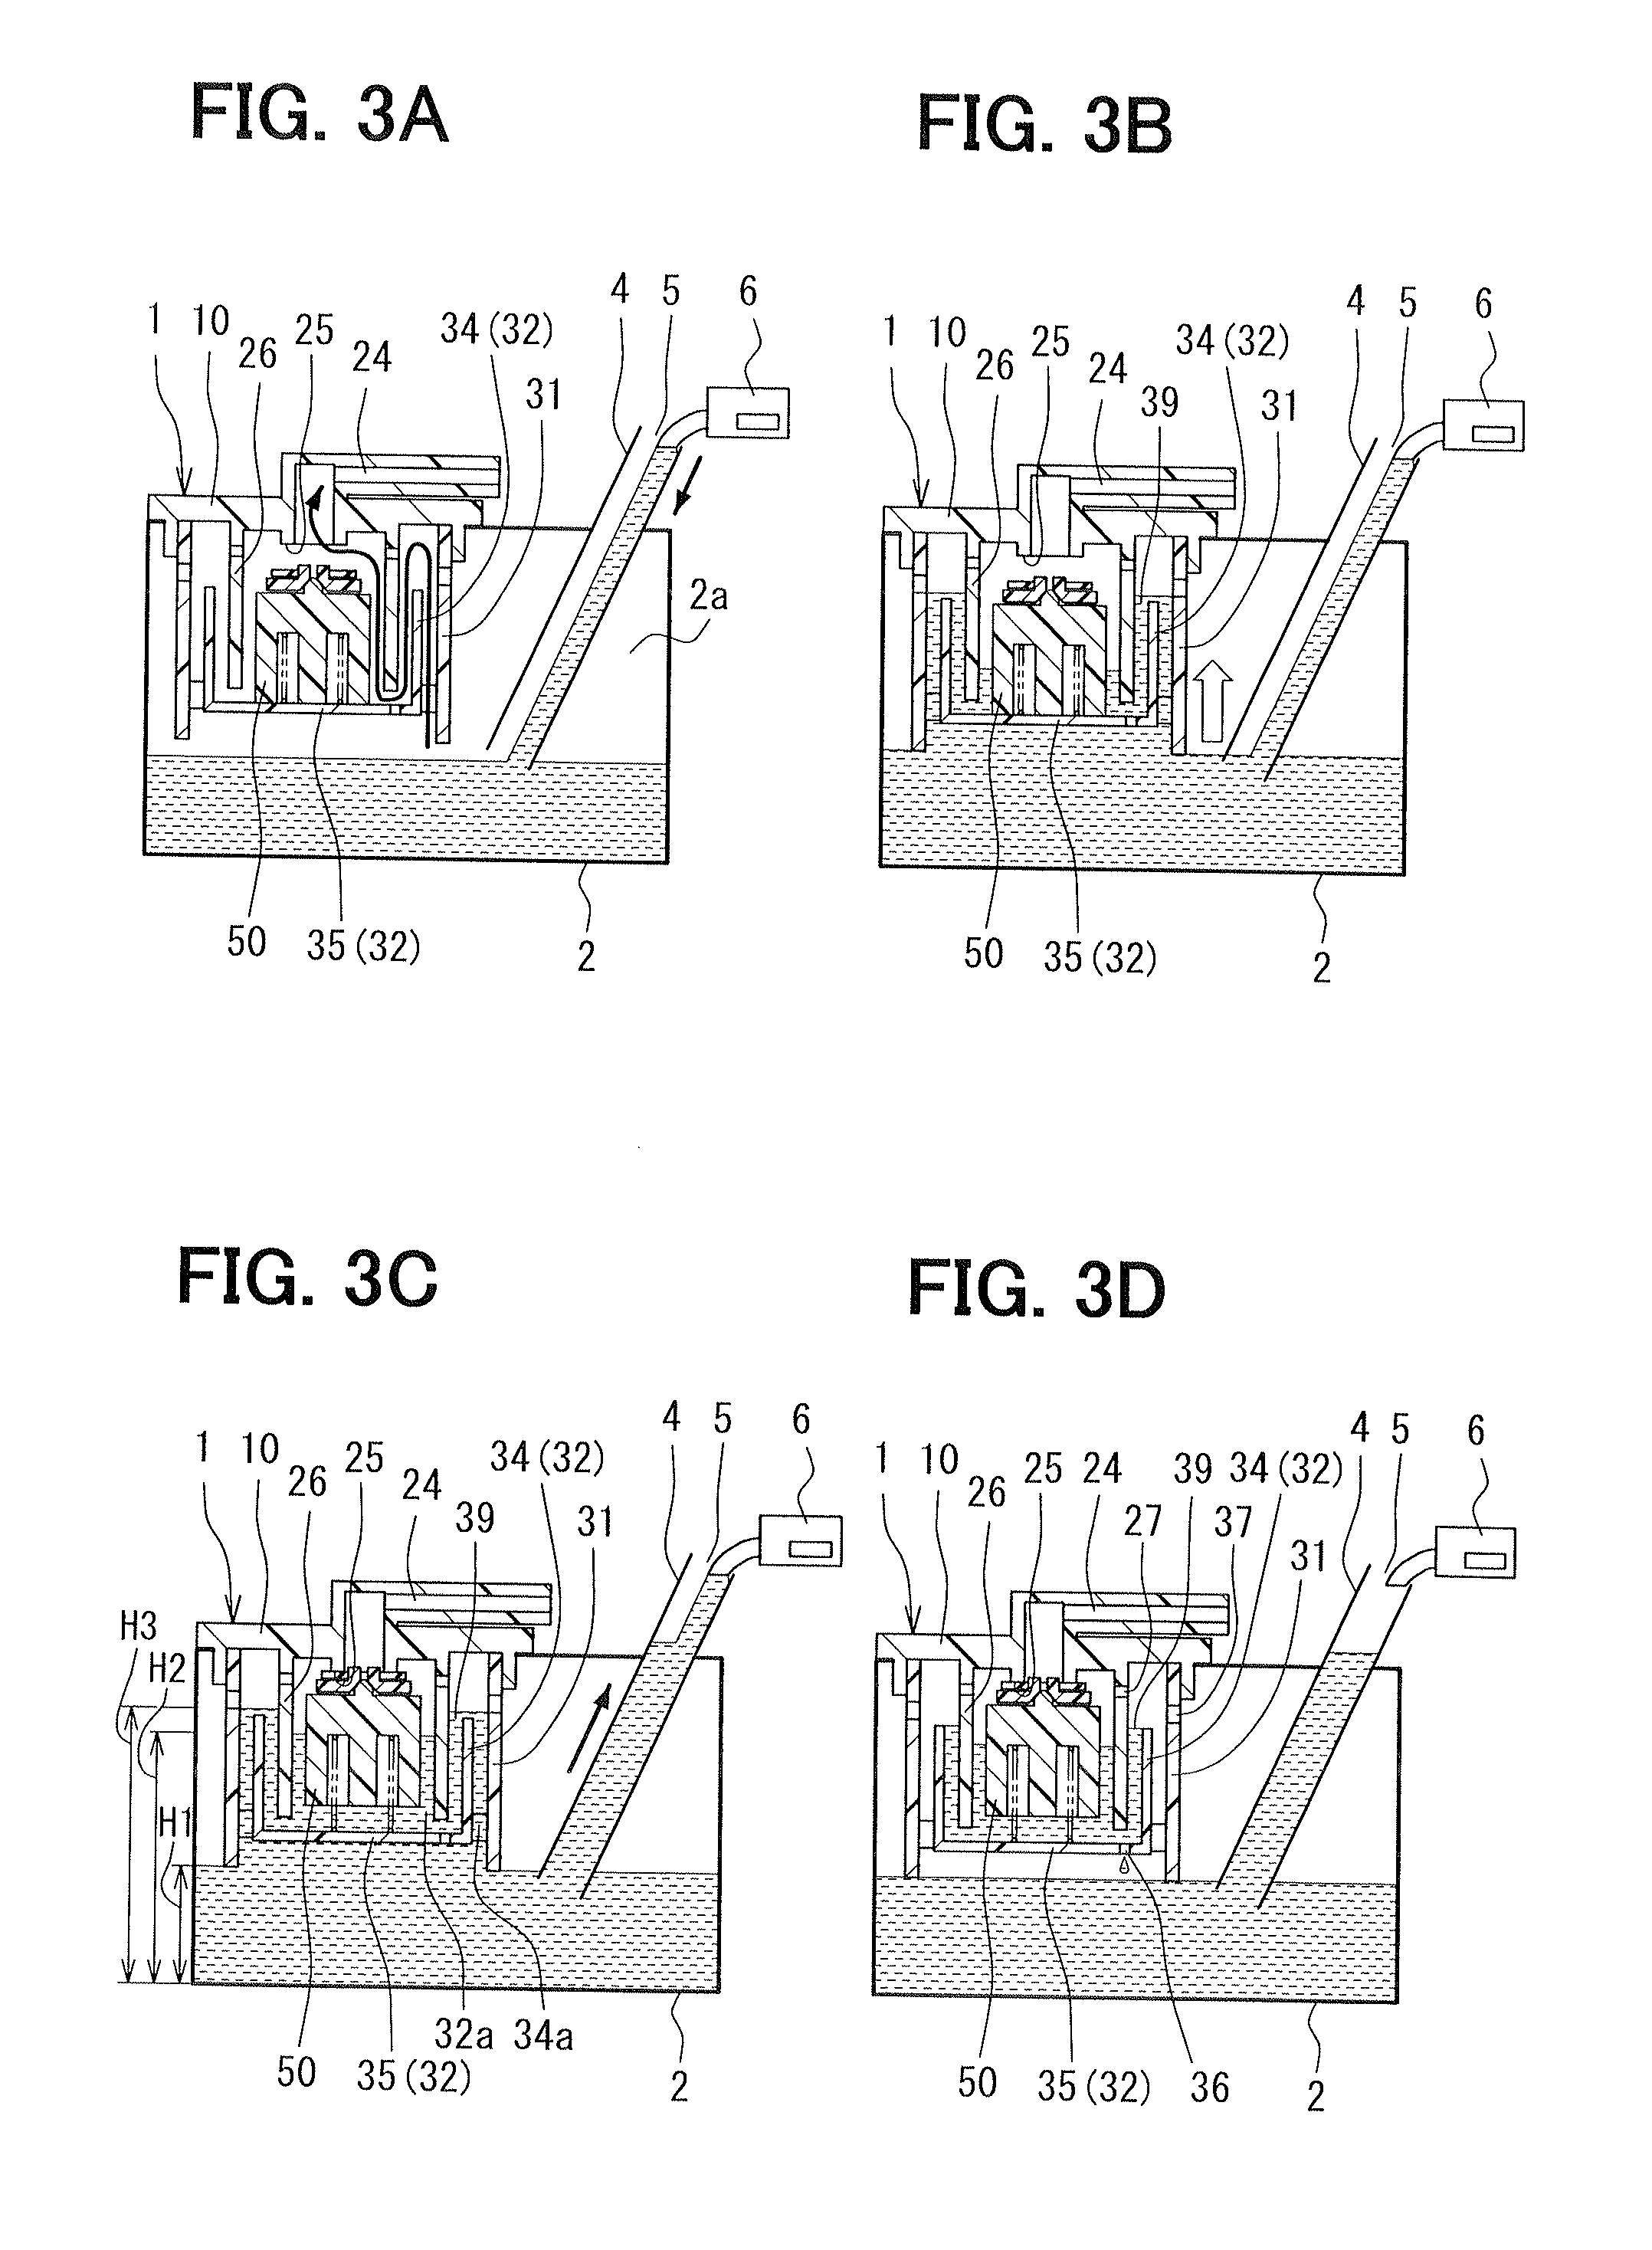 Fill-up control valve device